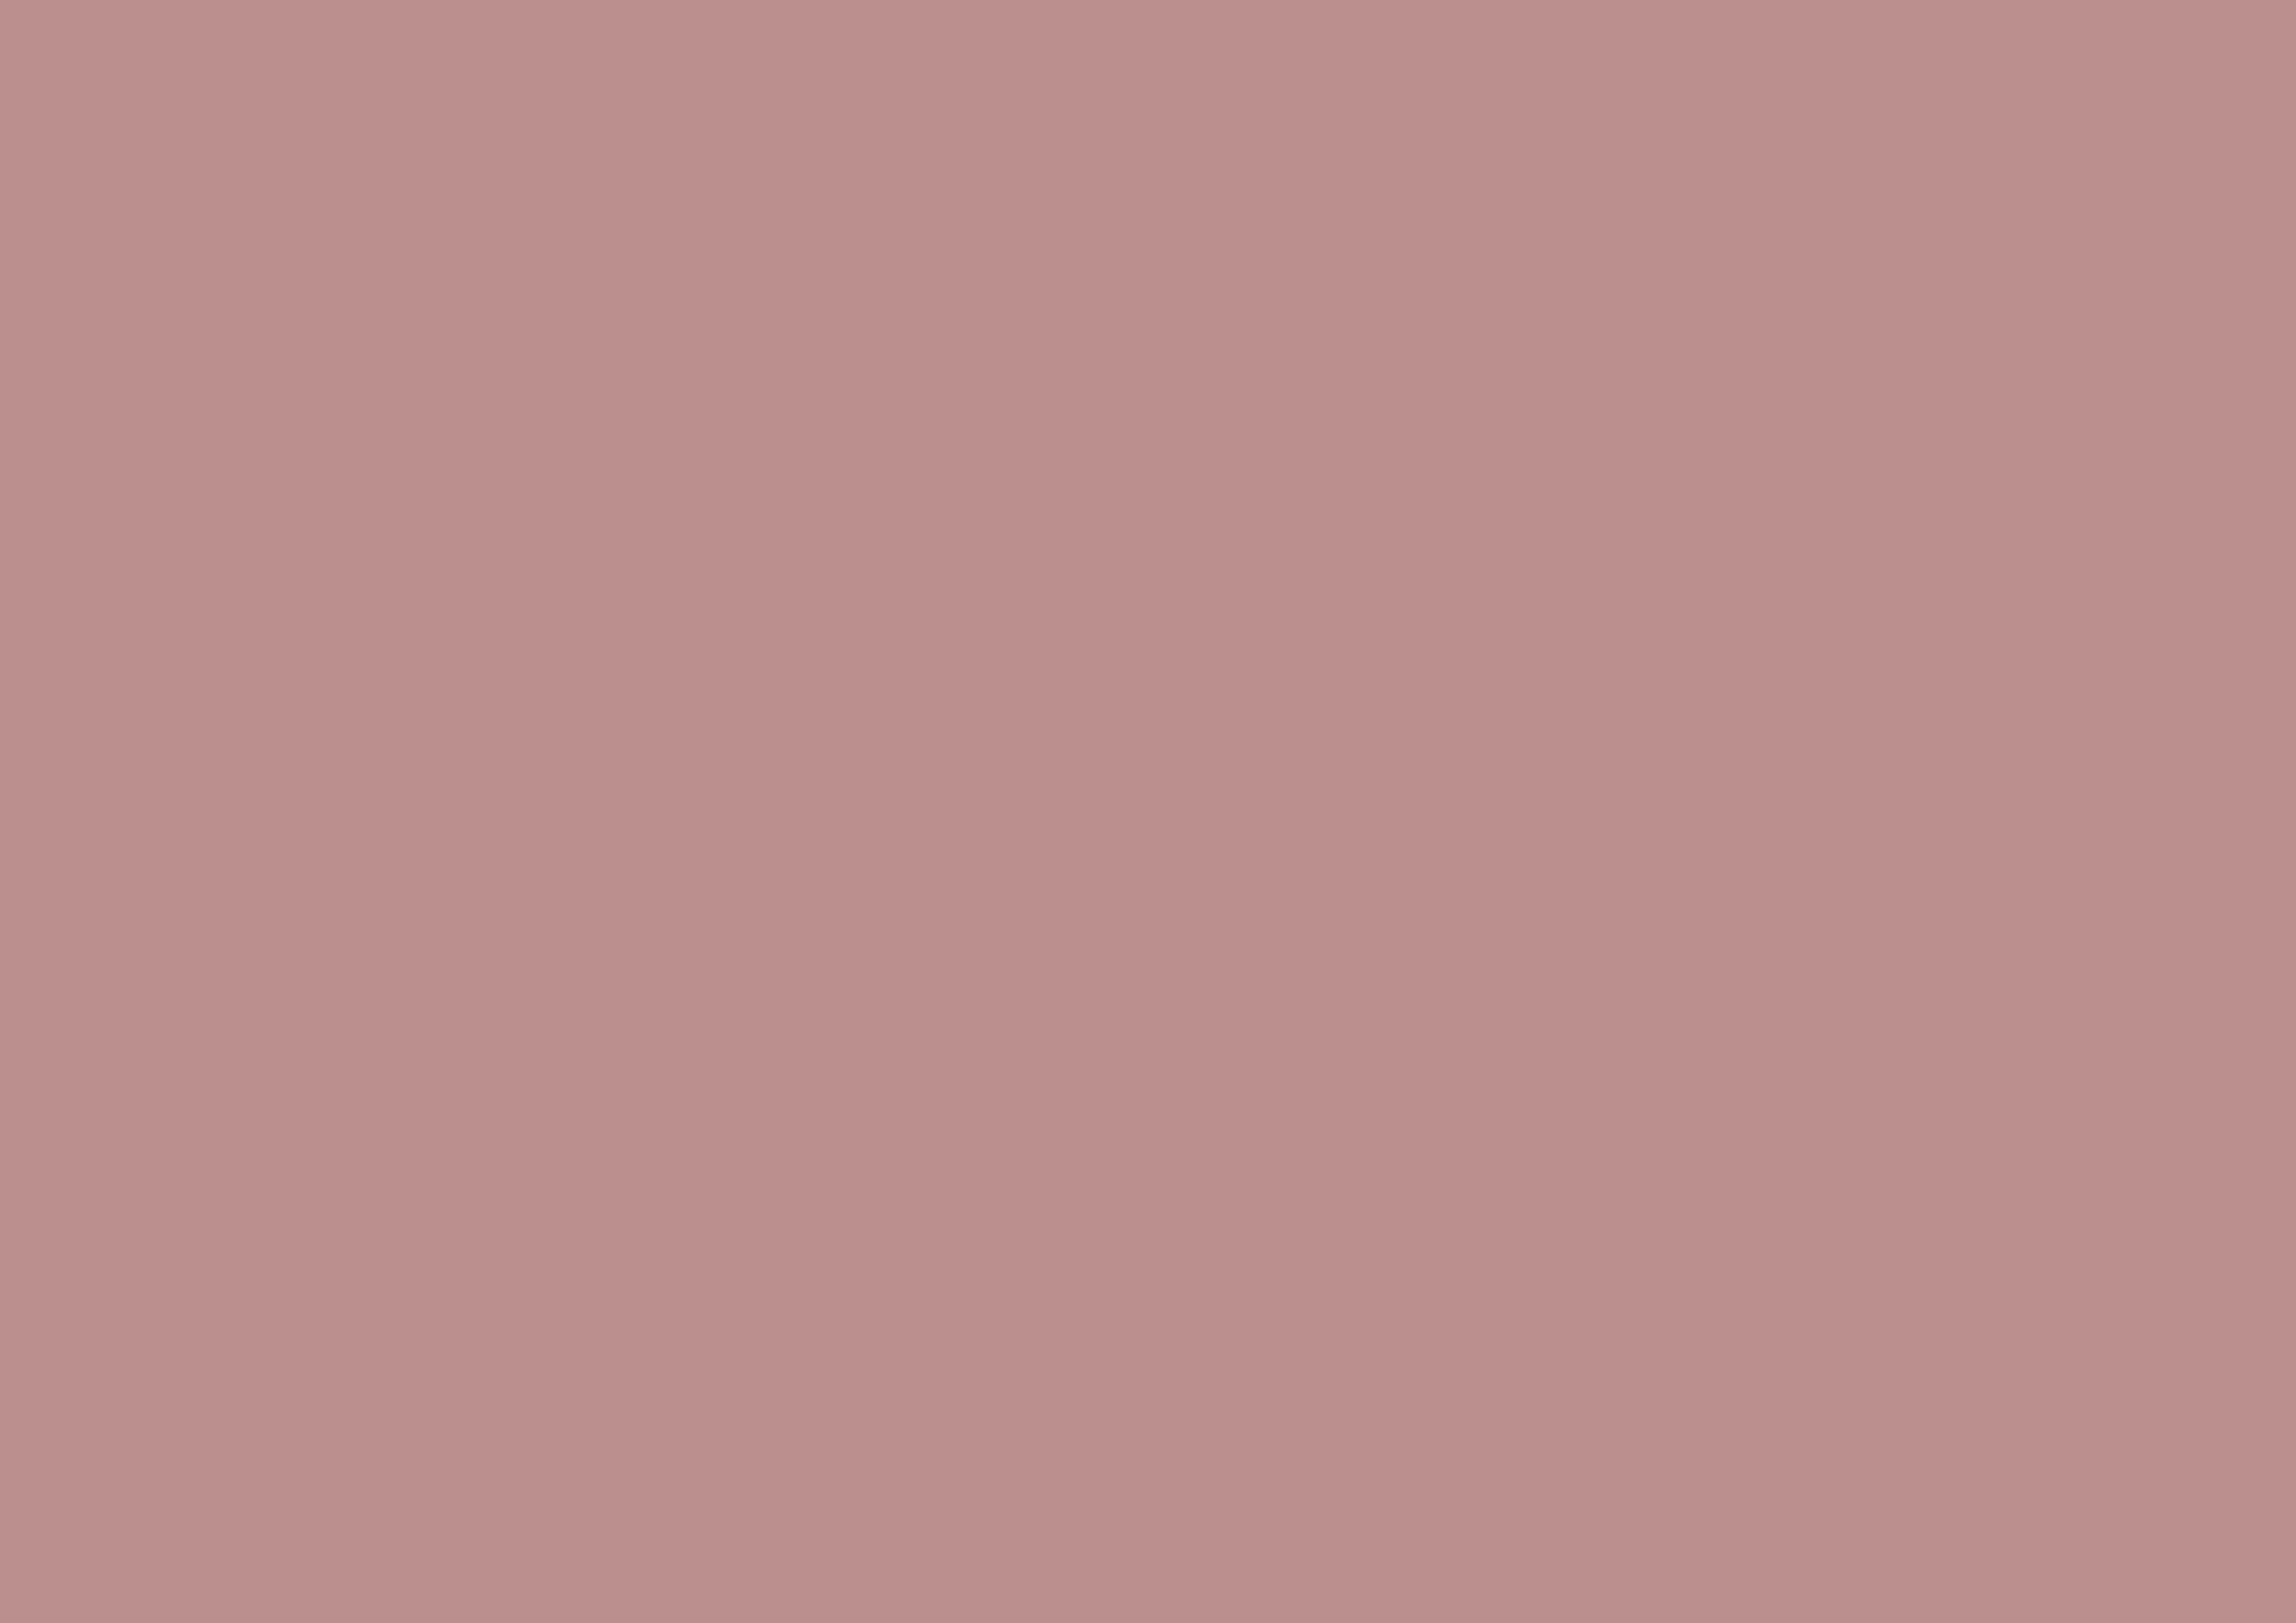 3508x2480 Rosy Brown Solid Color Background